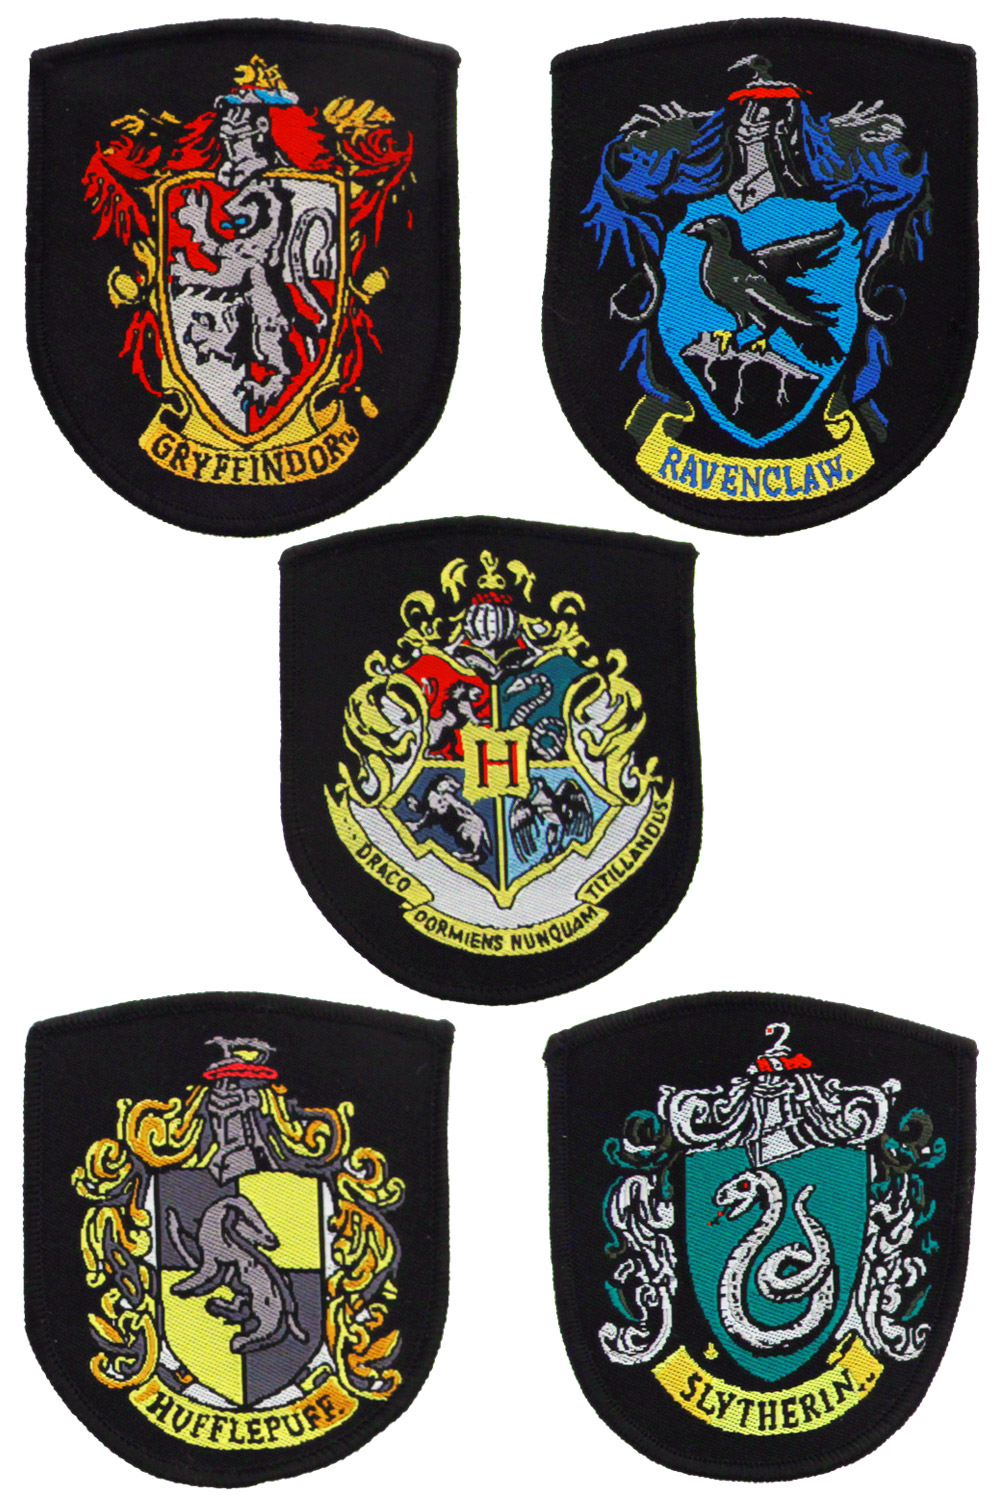 Harry Potter Patches 5-Pack House Crests